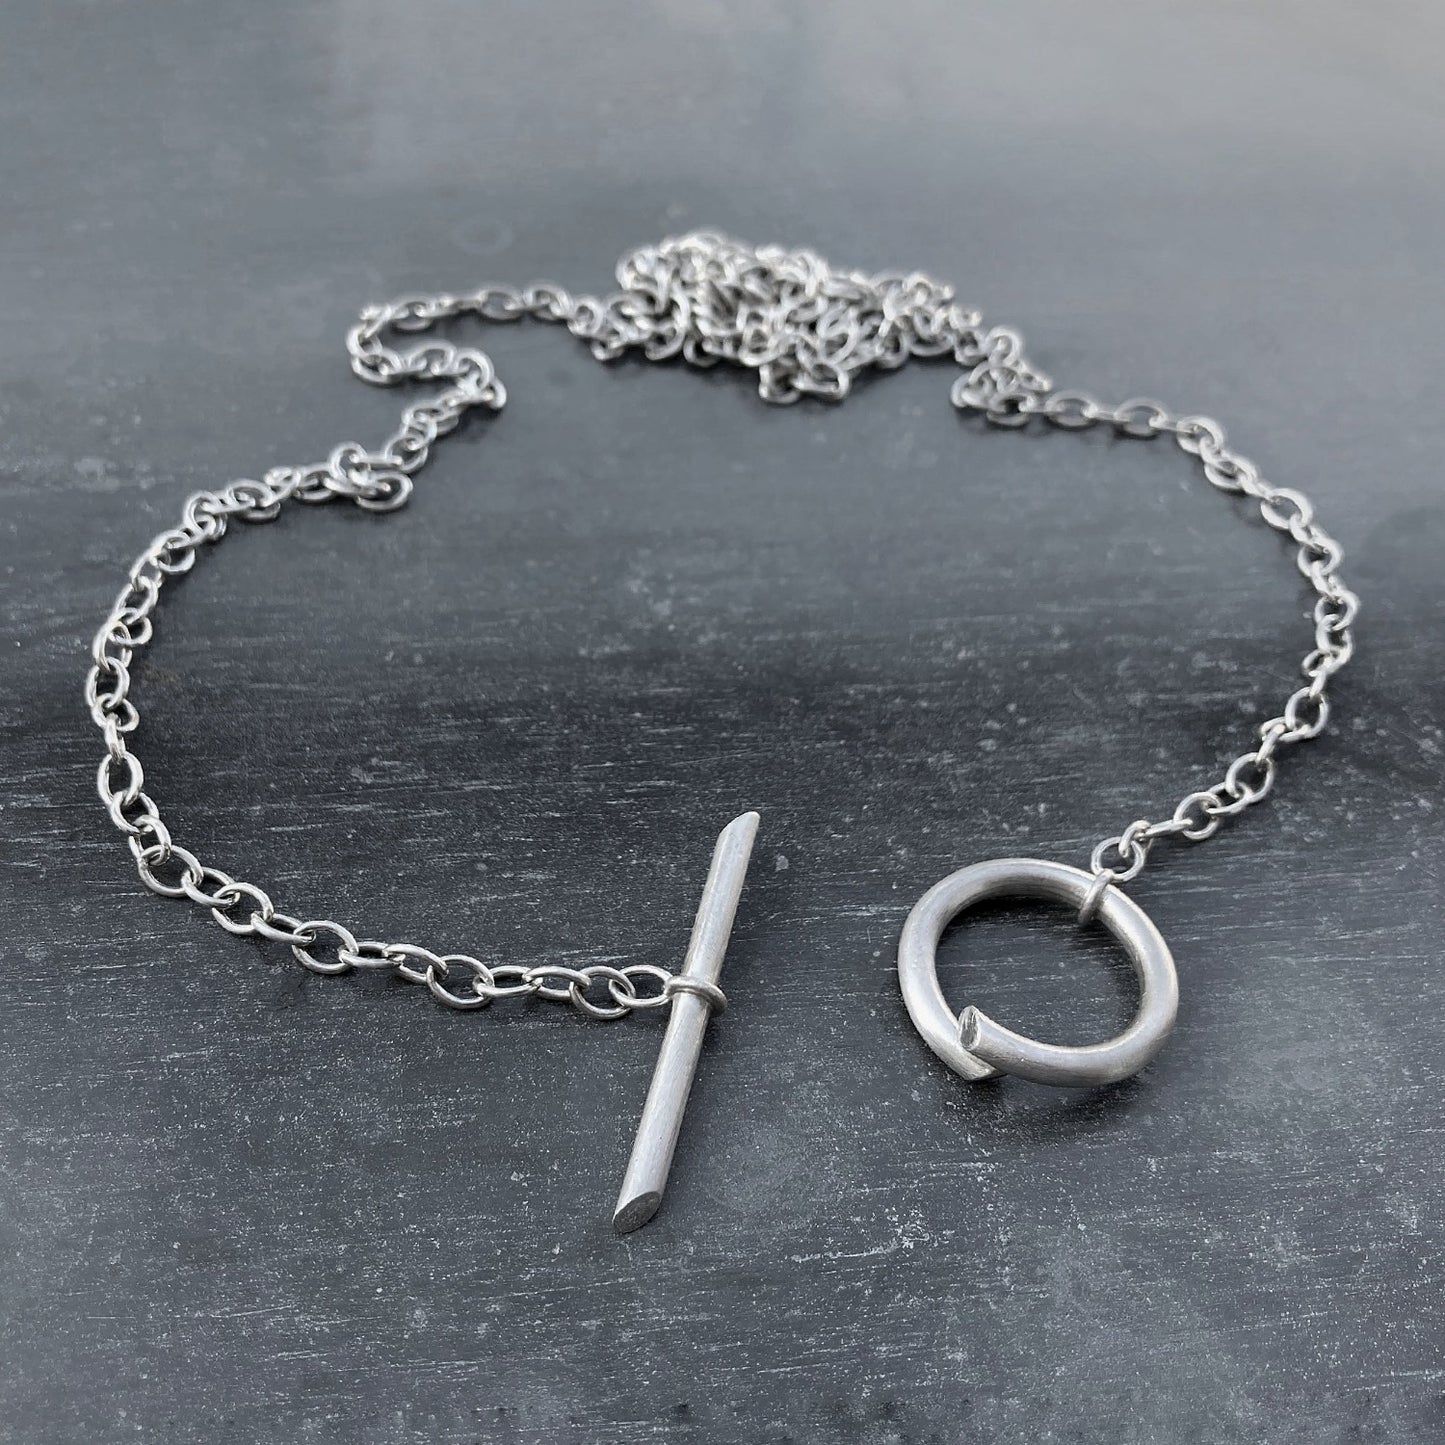 B1.2 necklace